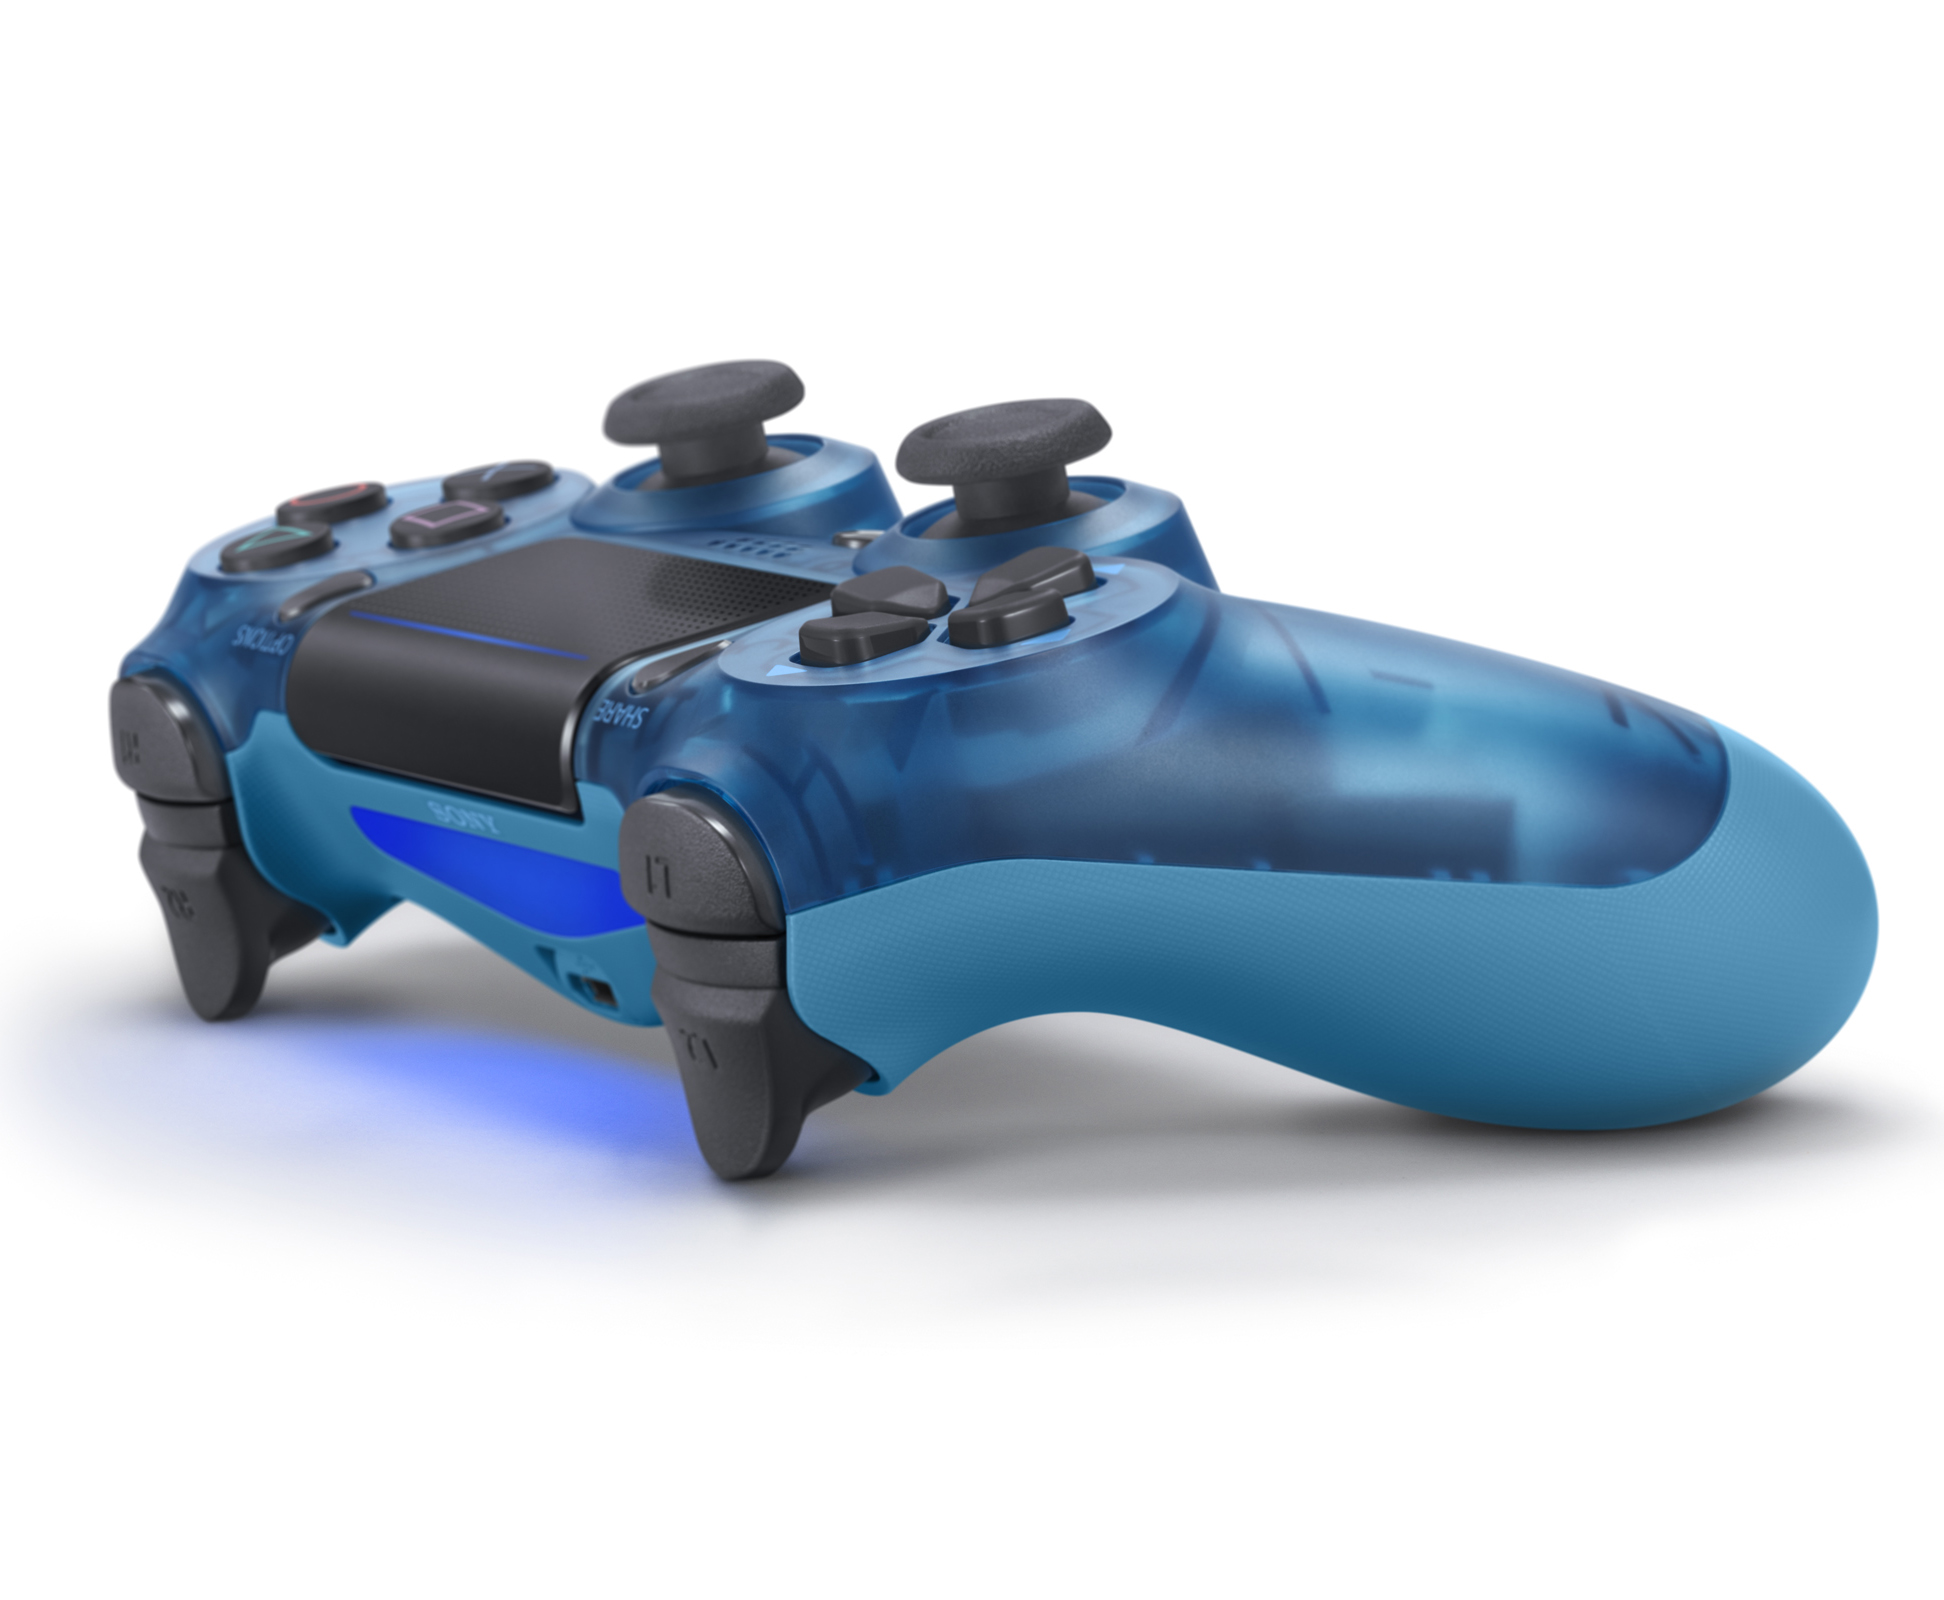 Sony PlayStation 4 DualShock 4 Controller, Blue Crystal, WMT Exclusive - image 3 of 6